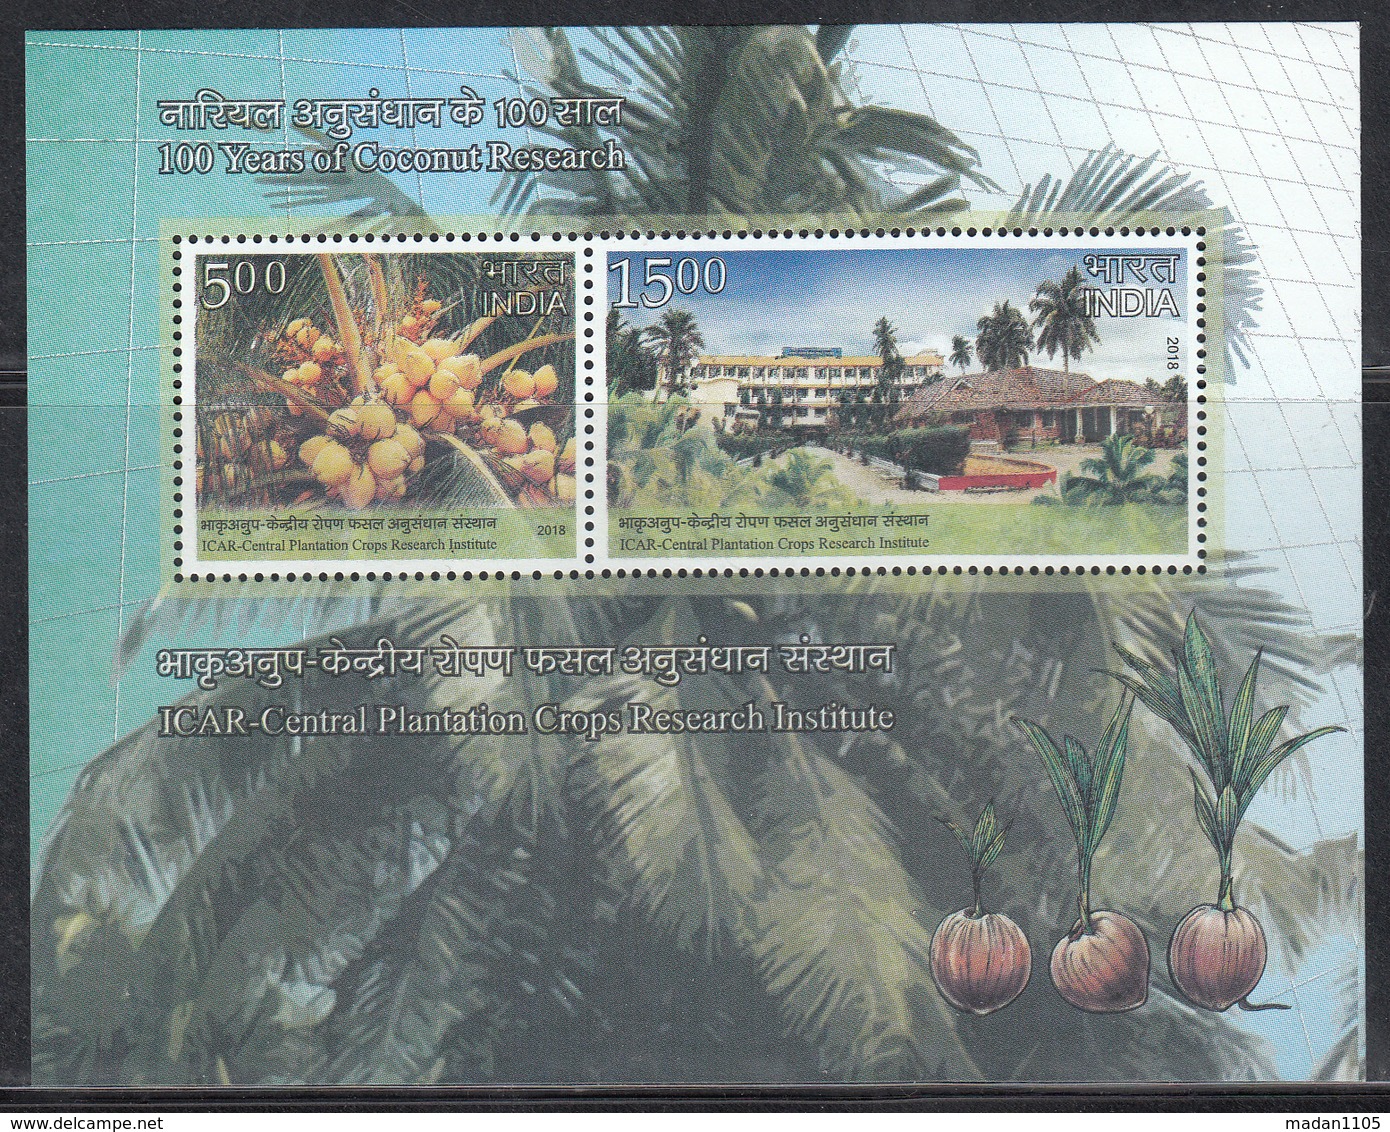 INDIA 2018 MS COCONUT Research 100 Years, ICAR, Miniature Sheet, MNH(**) - Neufs